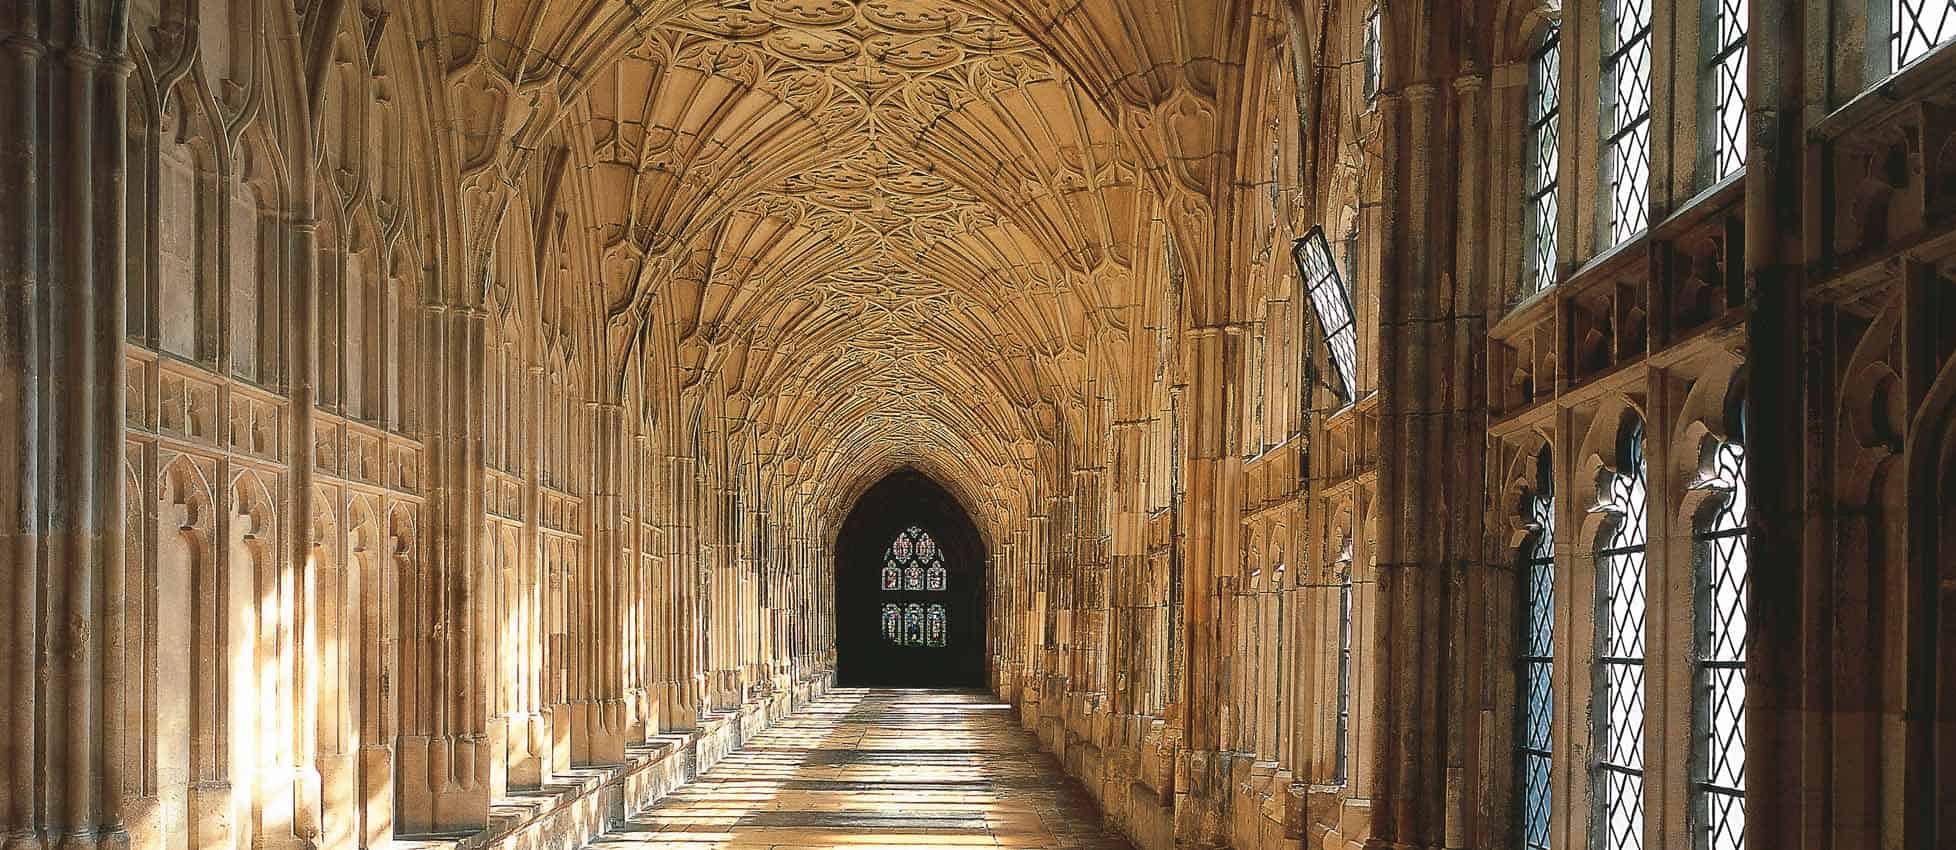 Gloucester Cathedral - The Association of English Cathedrals1956 x 850